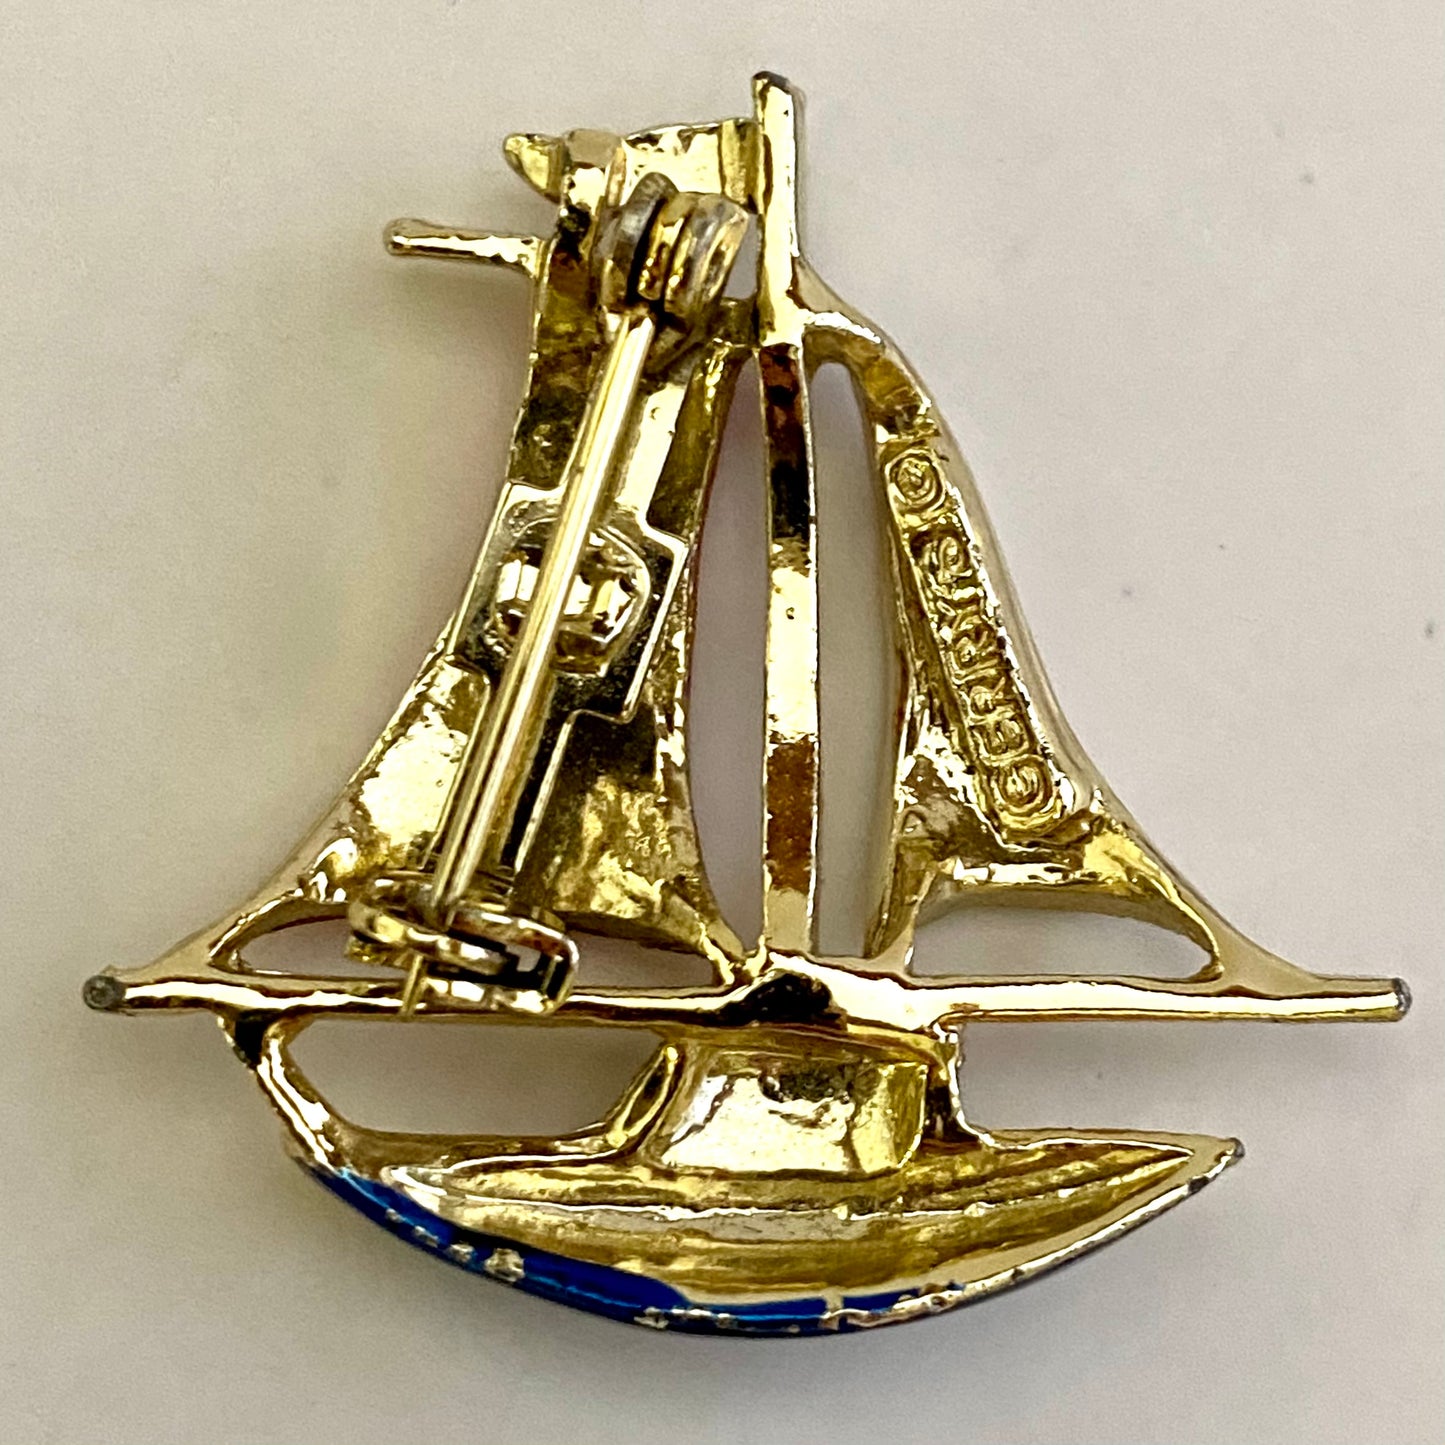 Late 60s/ Early 70s Gerry's Sail Boat Brooch